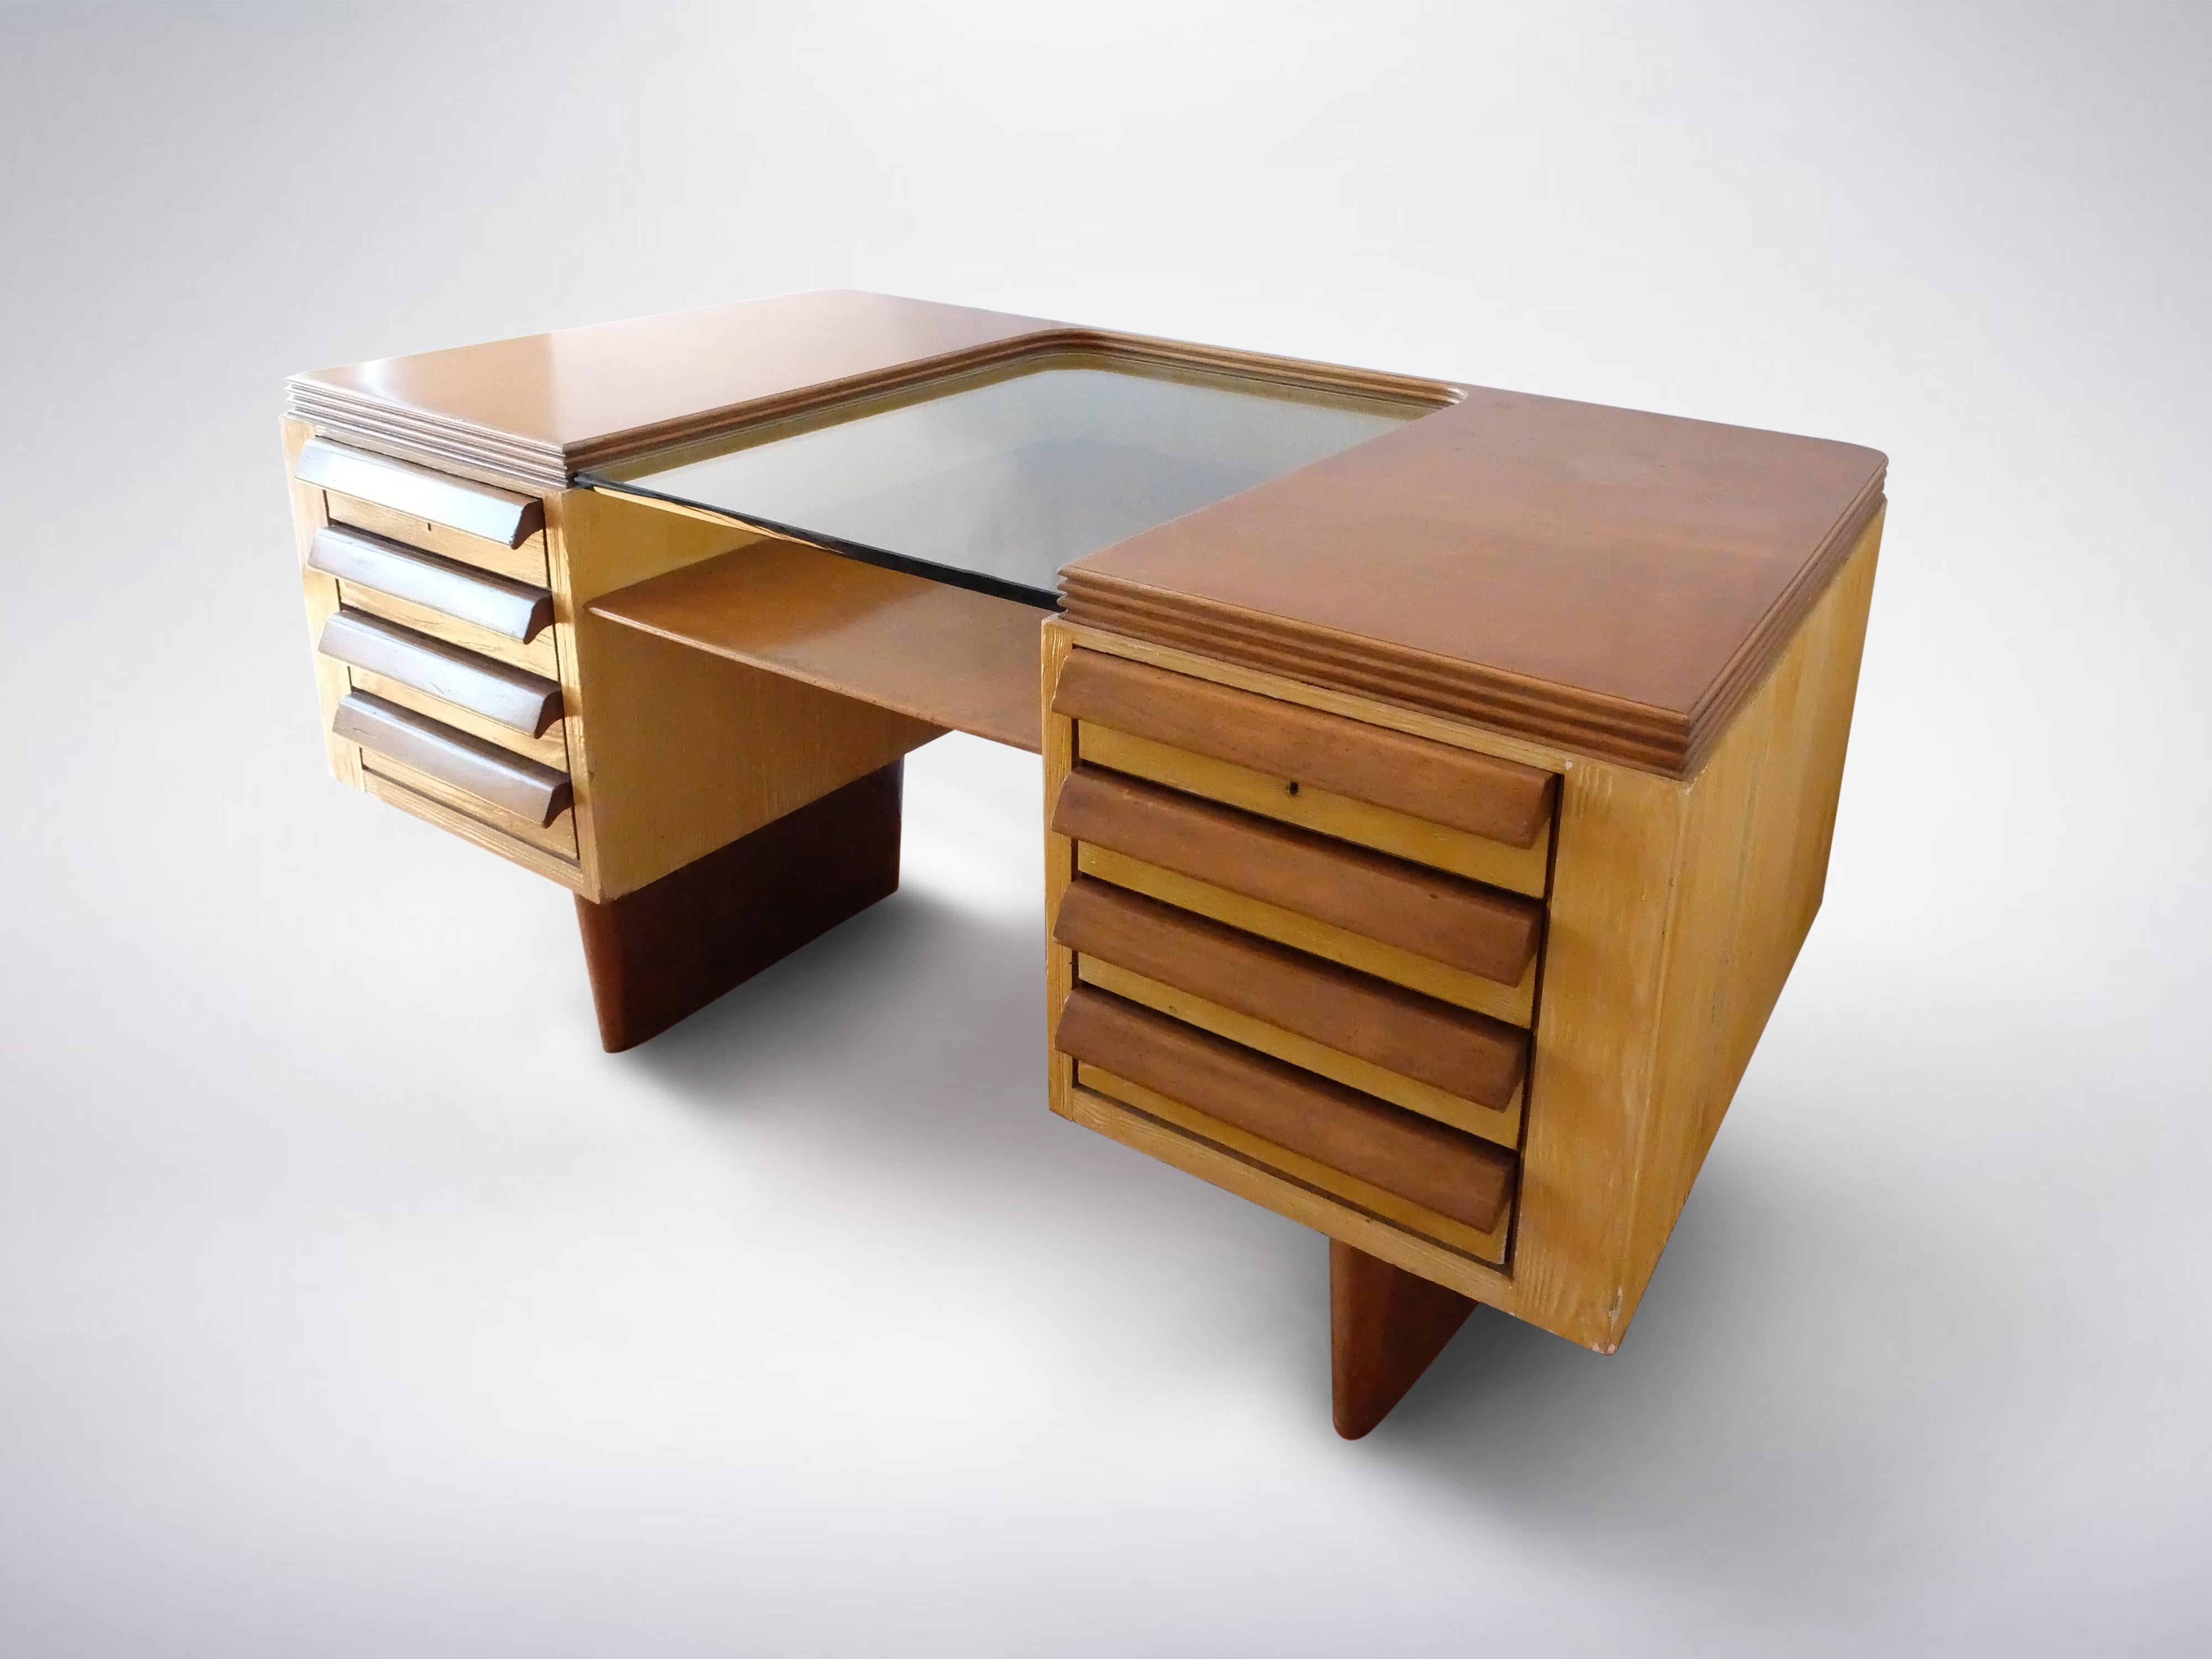 Italian mid-century stately wooden desk with glass top
1950s
Sturdy multipurpose desk with eight symmetrical drawers, on either side. The glass slab is in the middle giving the wooden table a surprising break, creating lightness.




Please